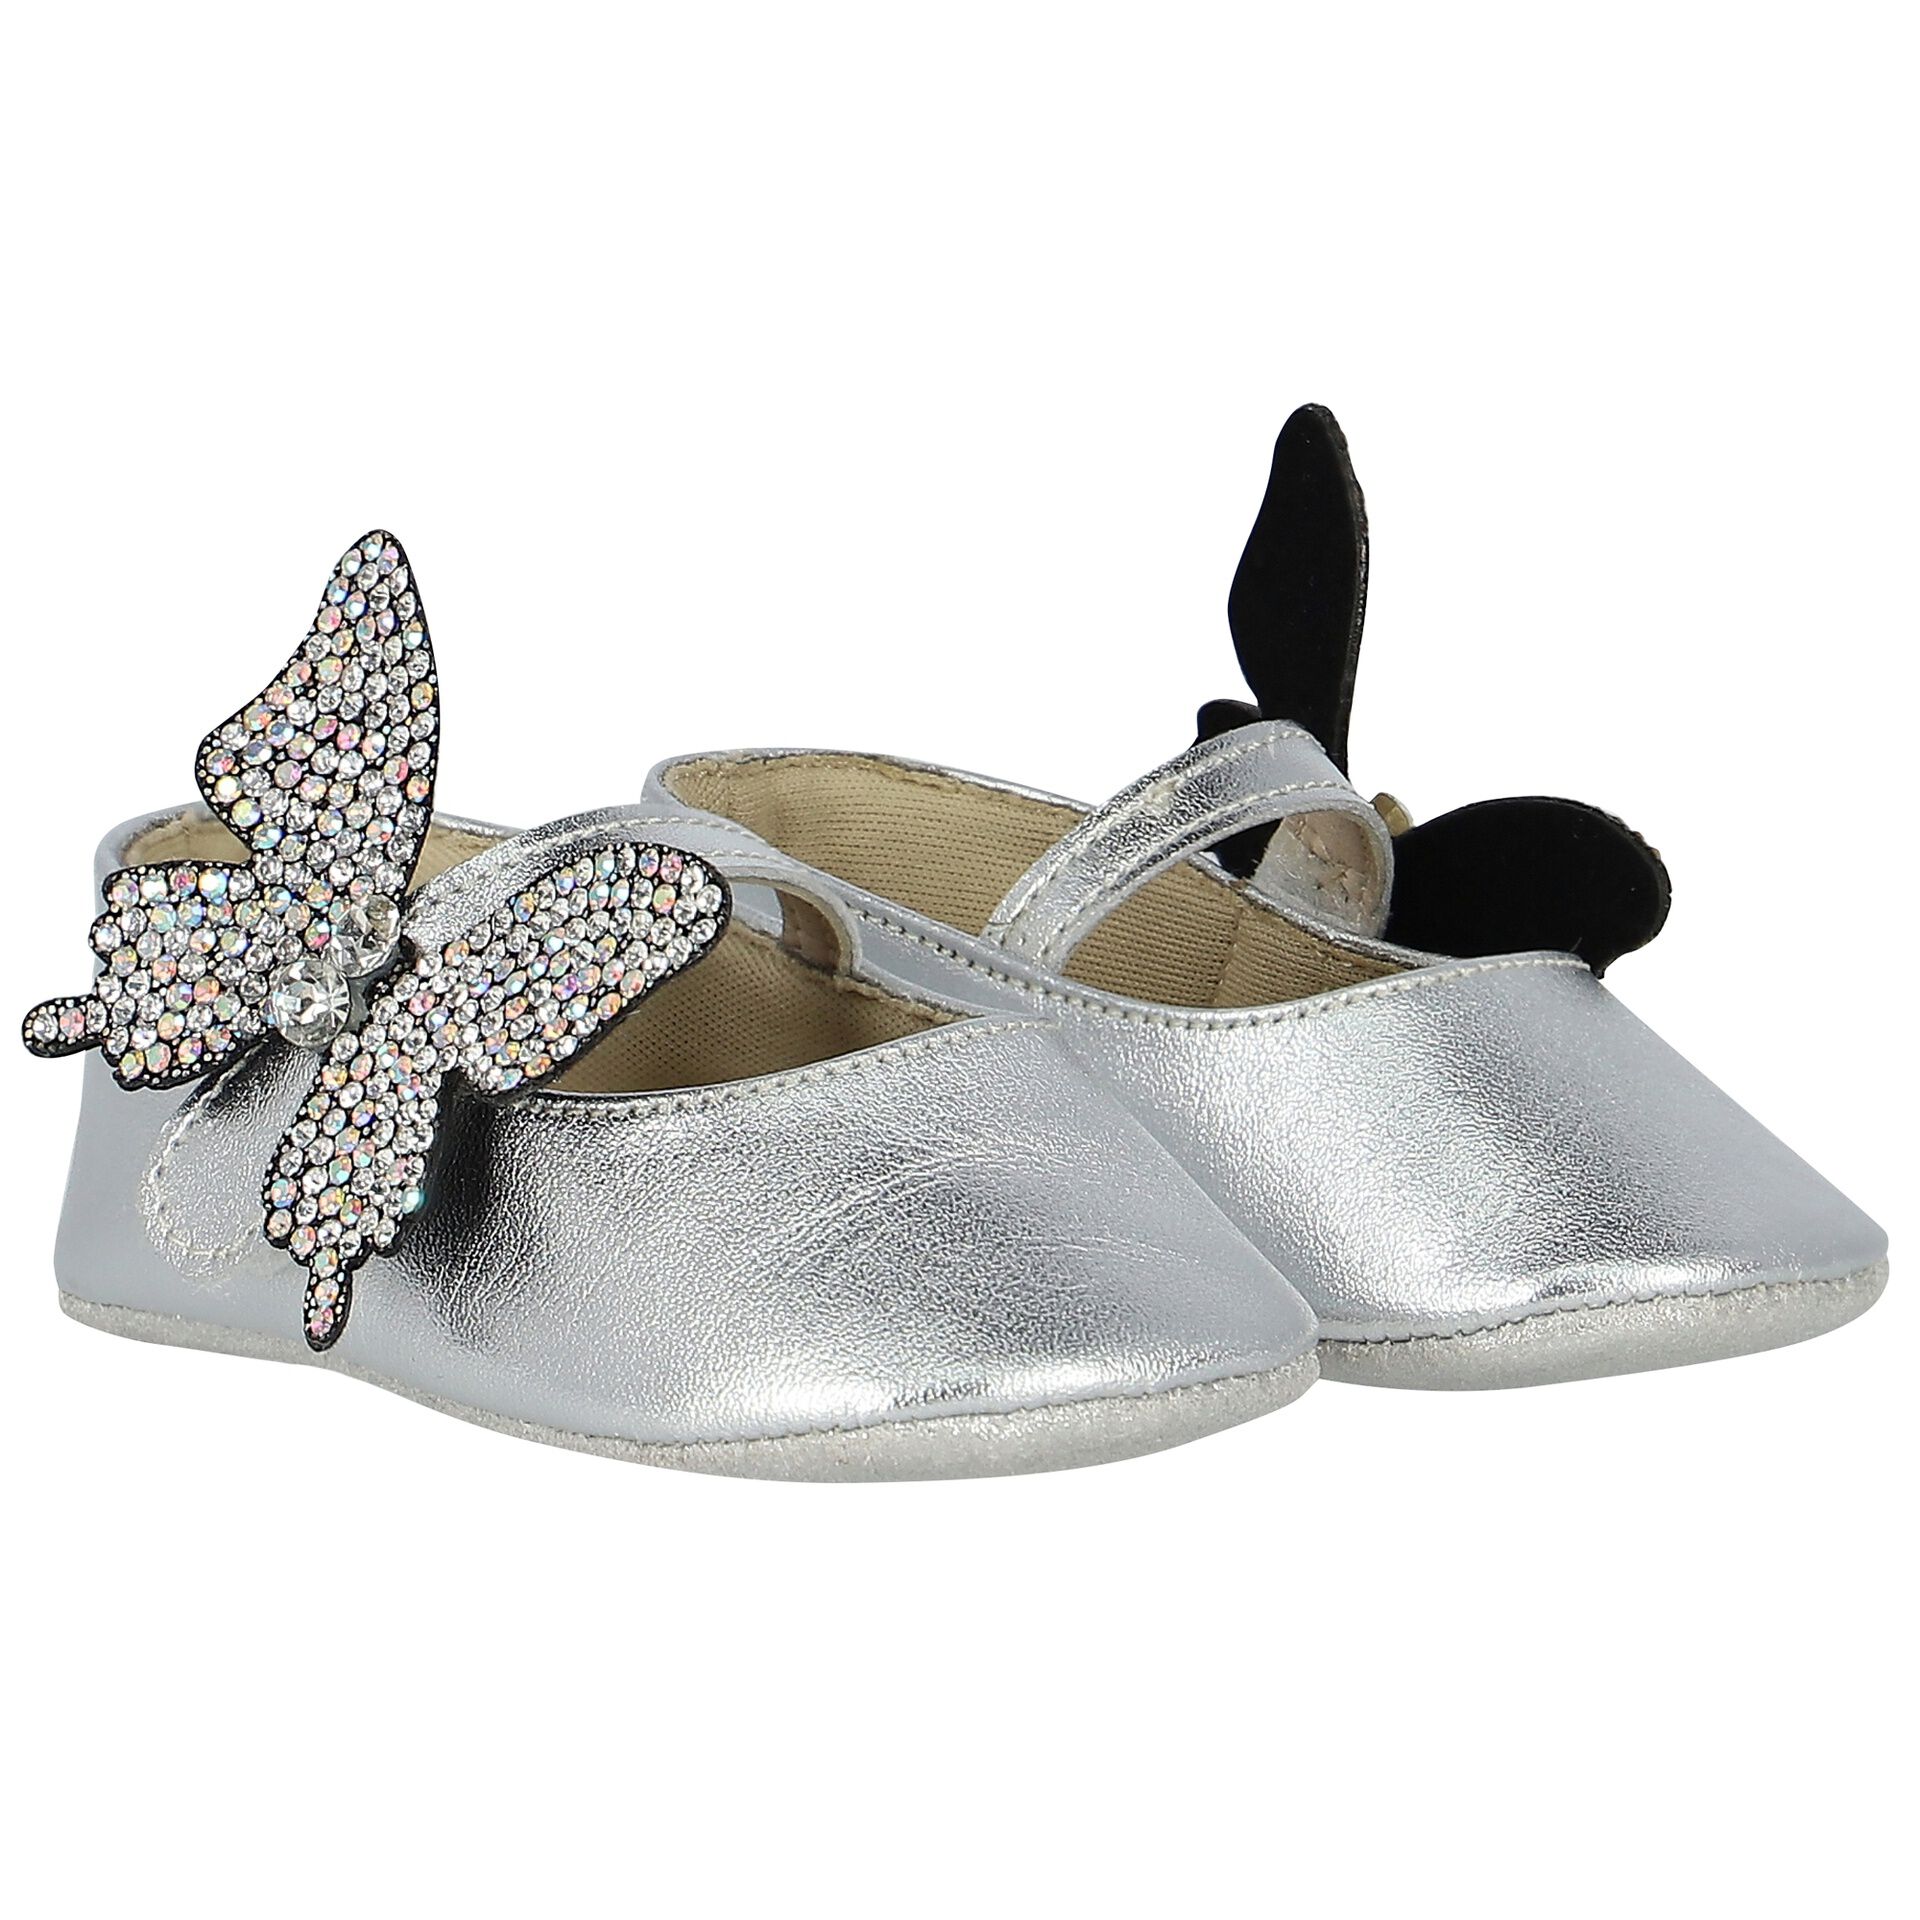 BabyWalker butterfly-appliqué leather ballerina shoes - White